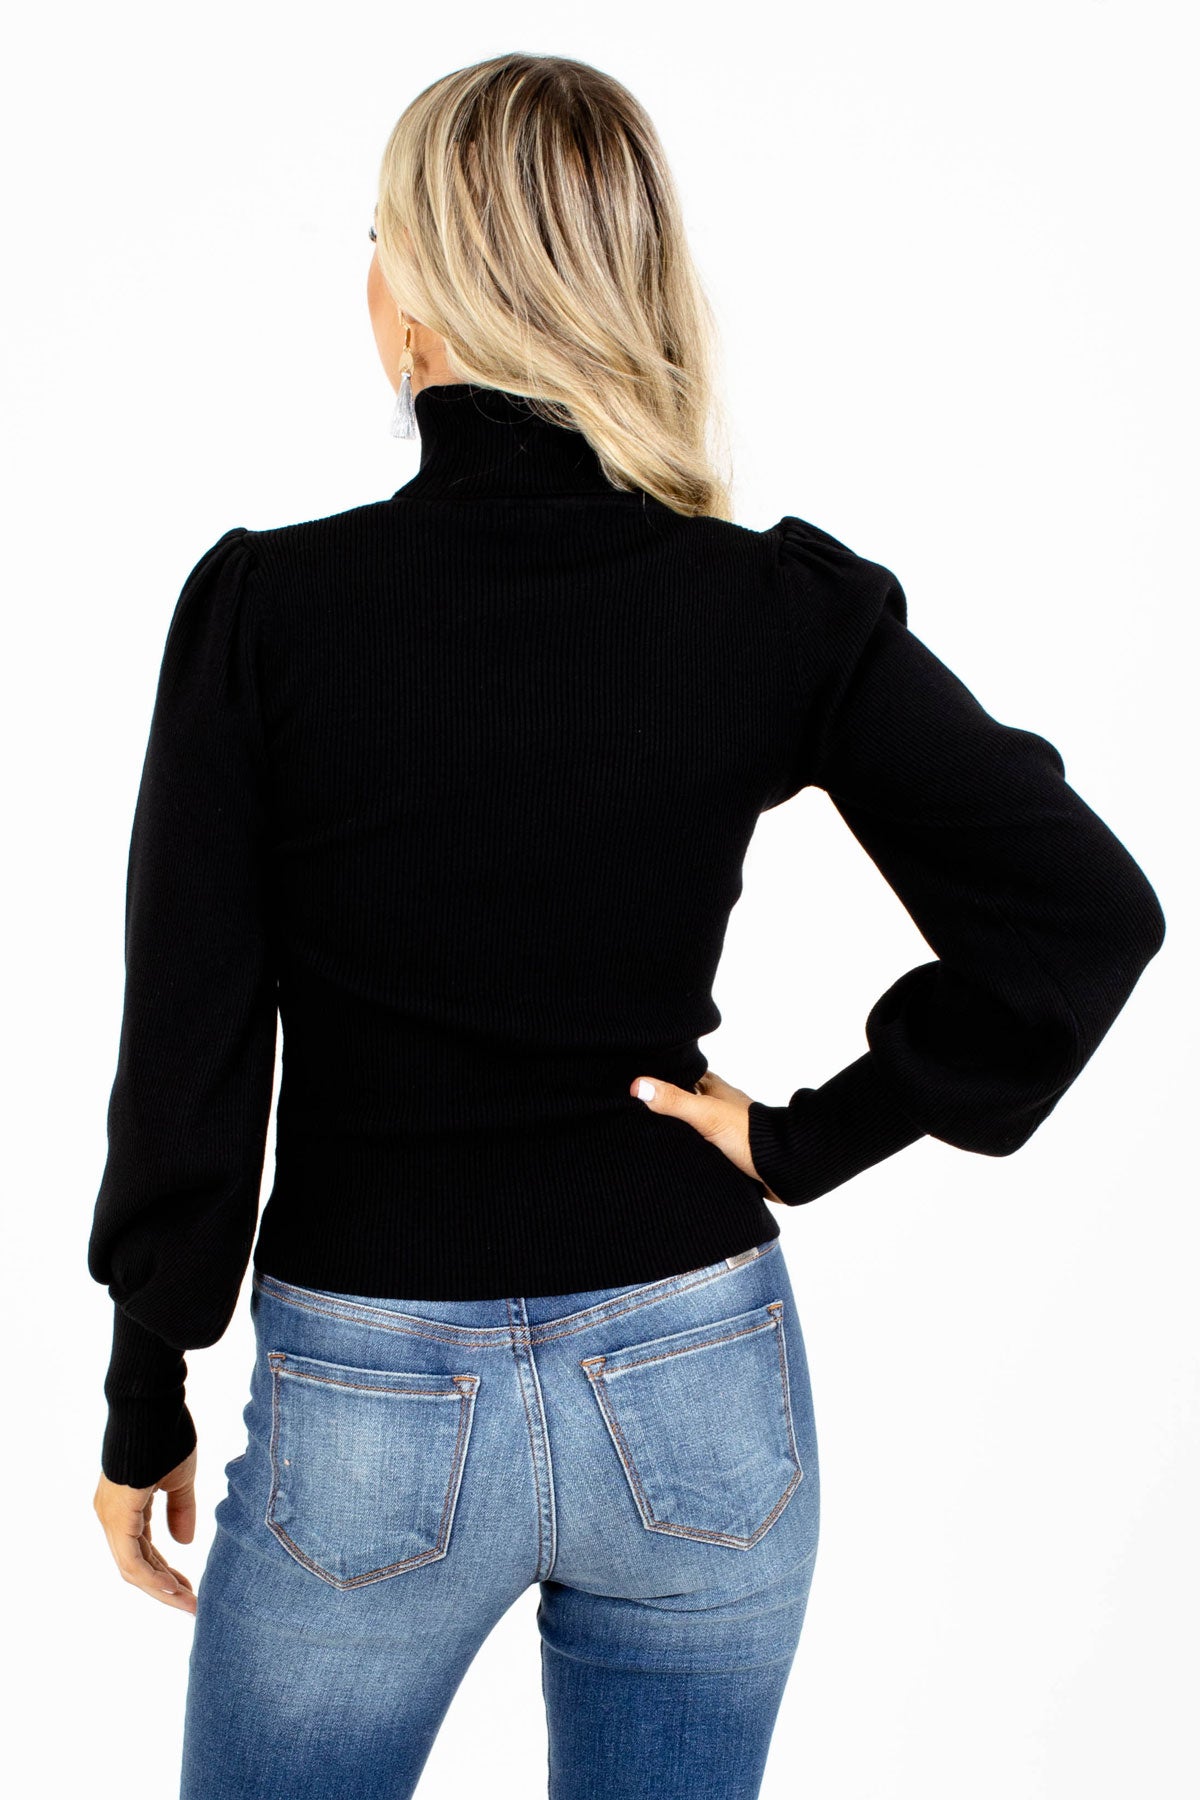 Black Cozy Fall Top with Puff Sleeves